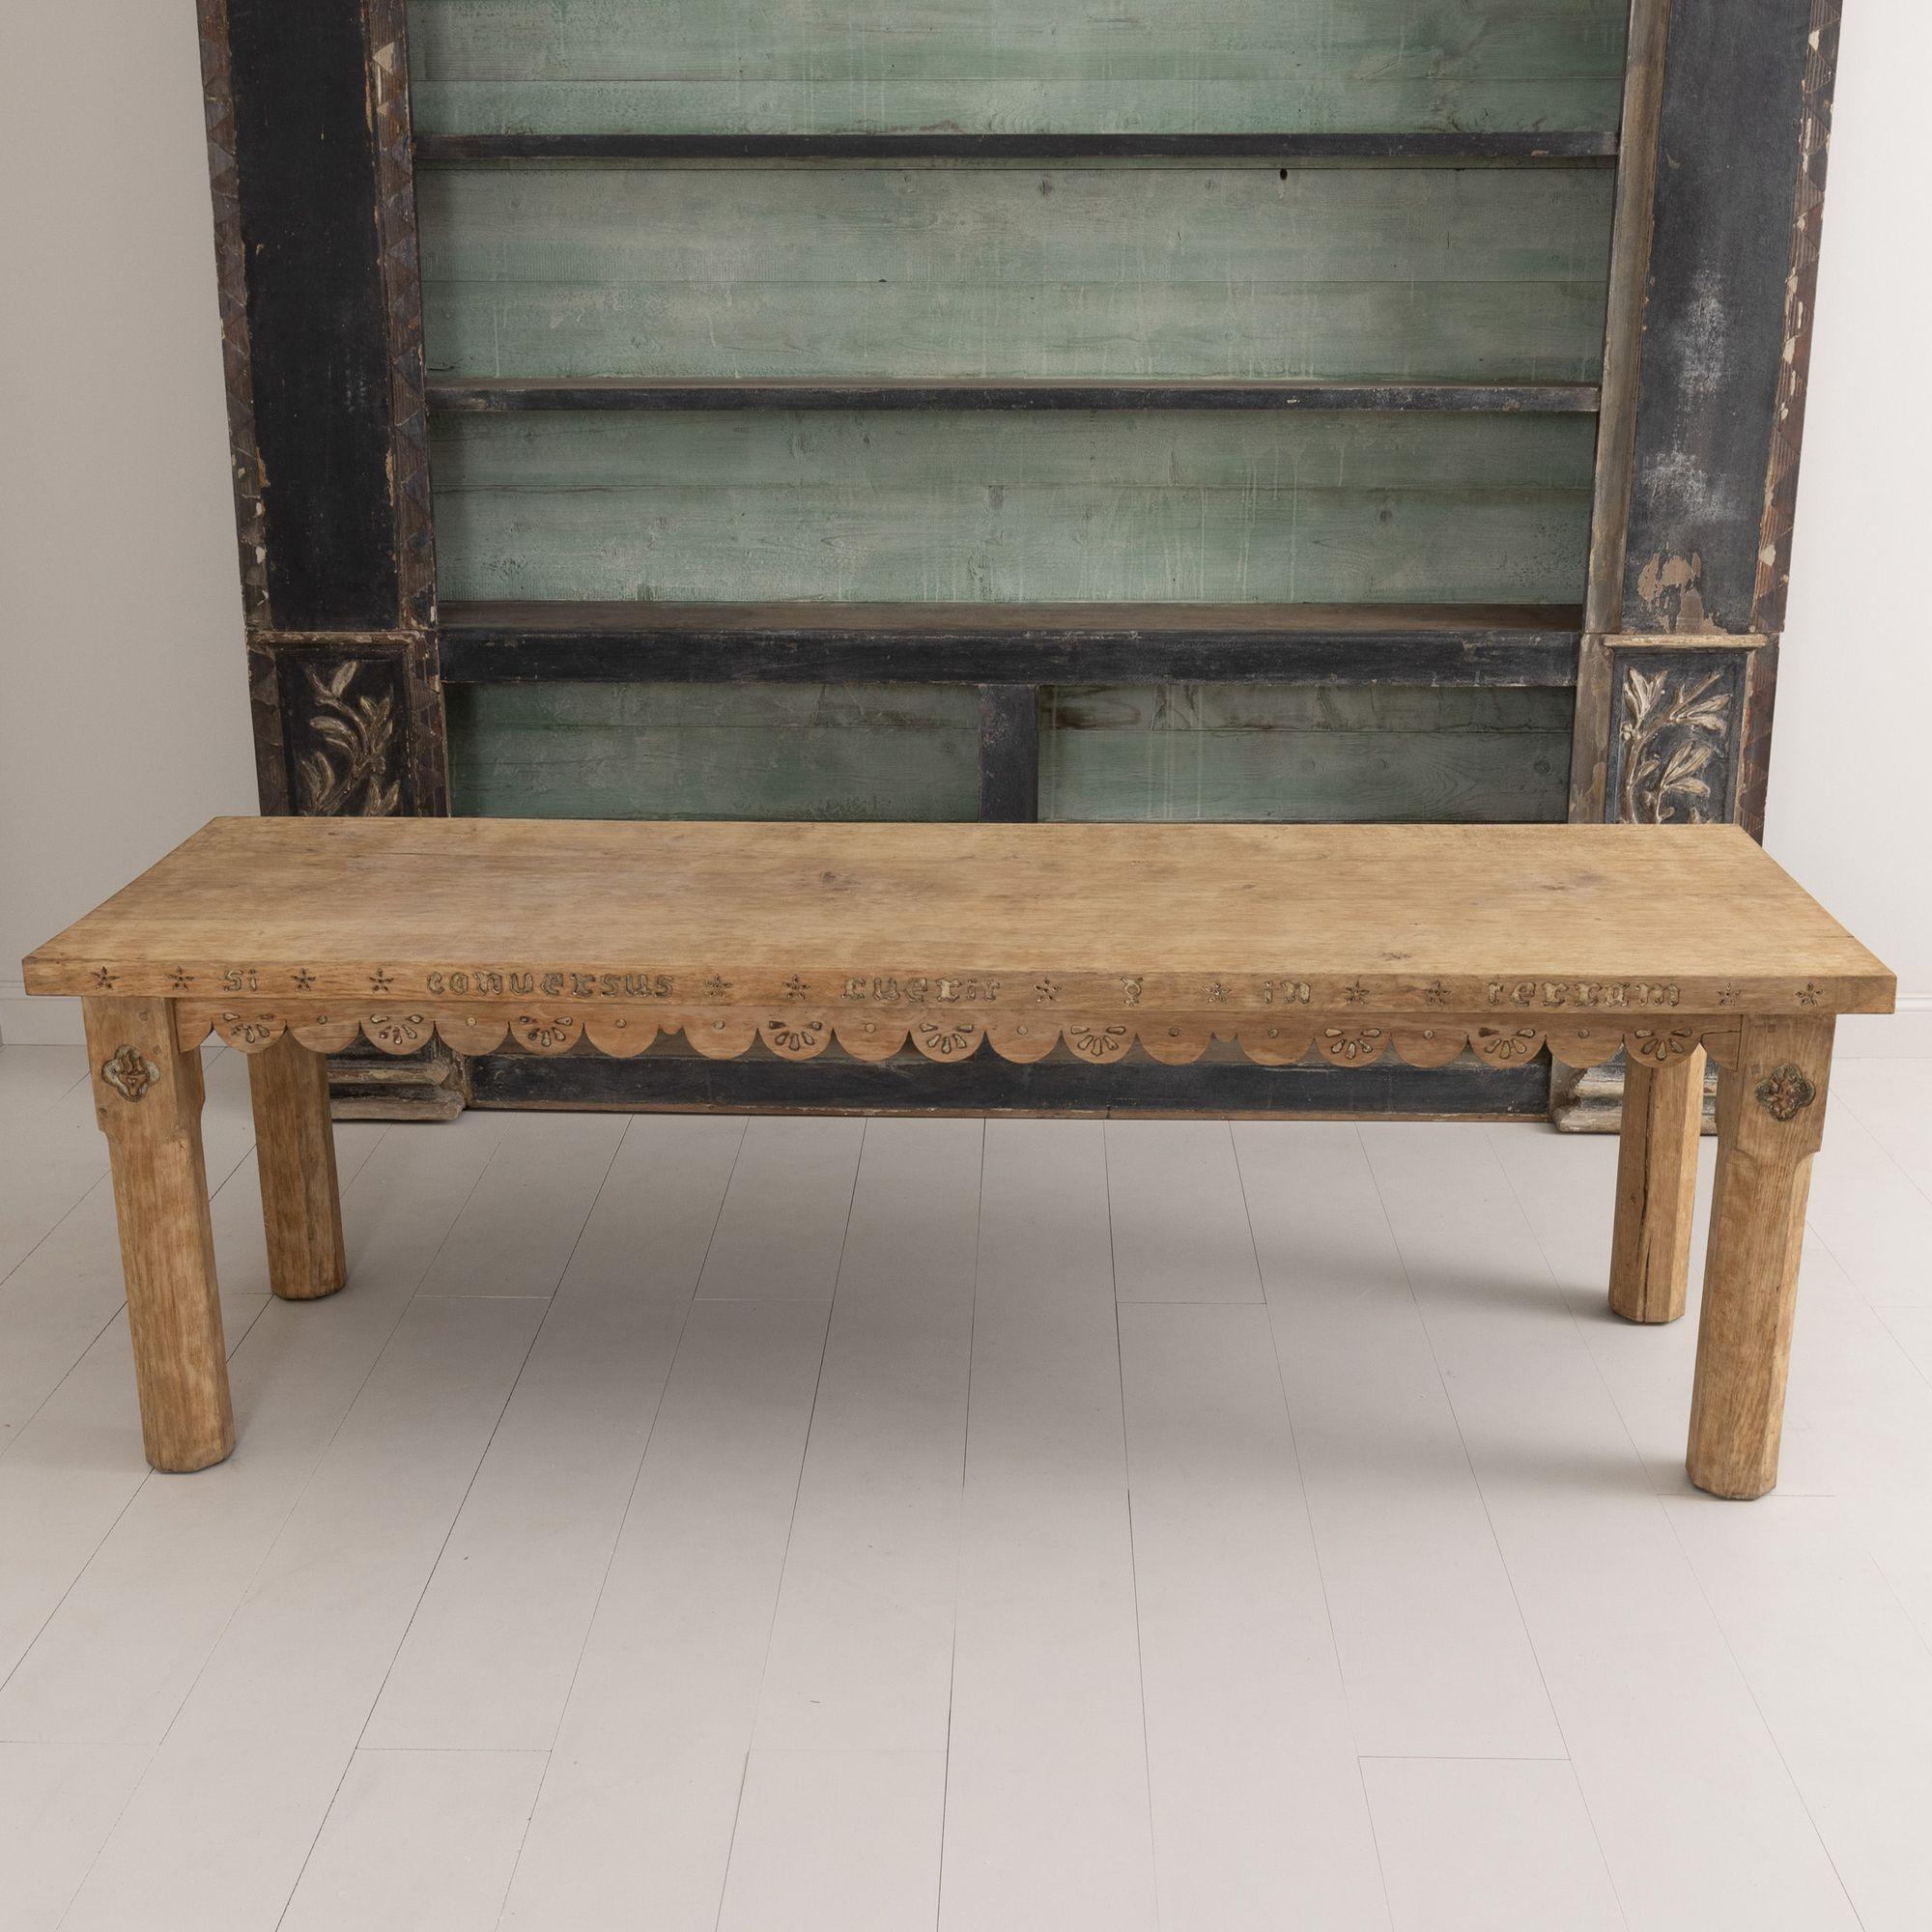 French Provincial 19th c. French Oak Farm Table with Scalloped Apron and Latin Carvings